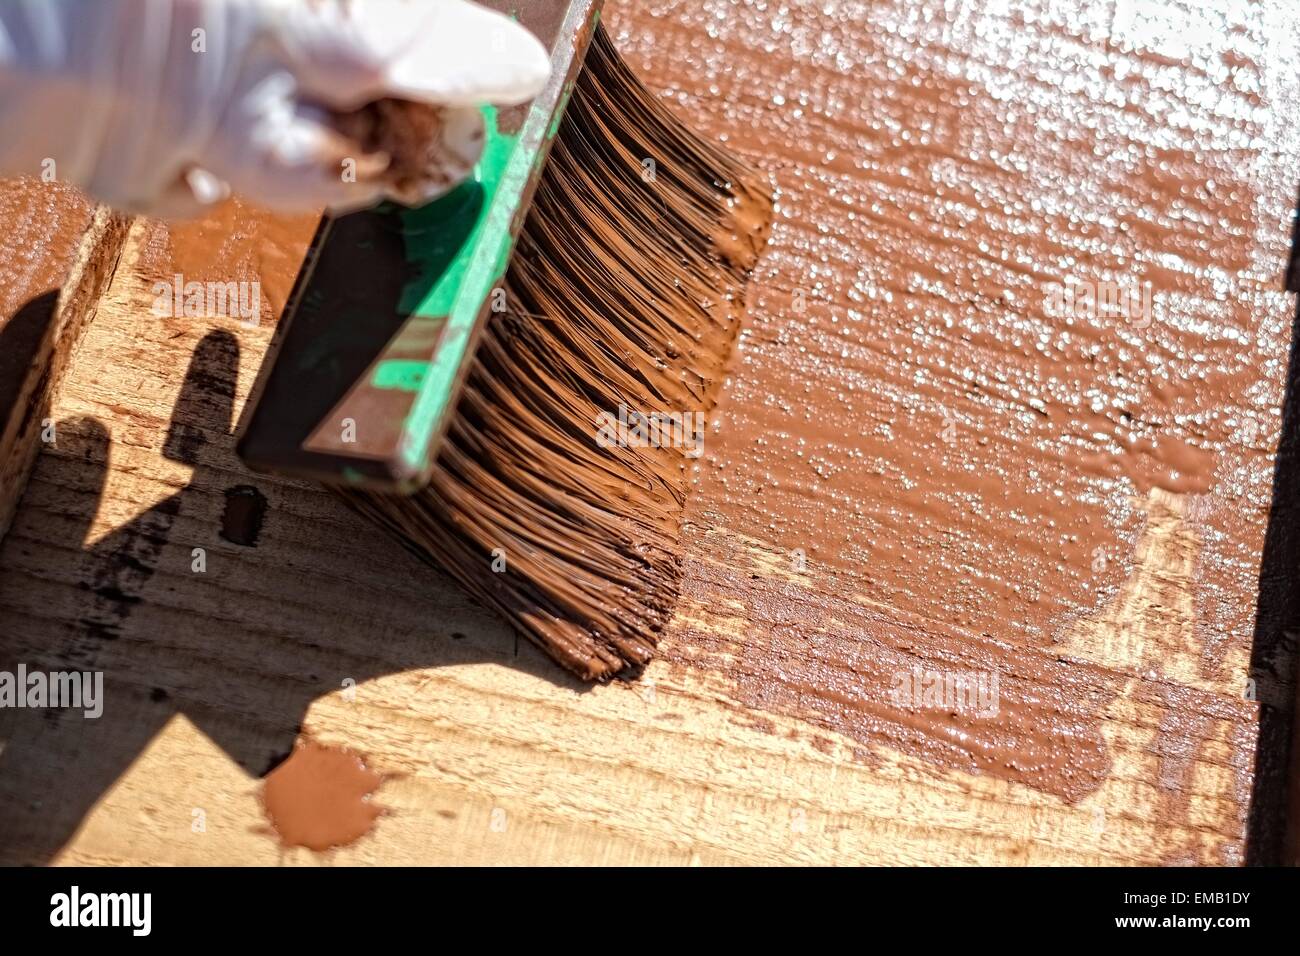 A brush being used to apply paint to a wooden fence panel England UK. Stock Photo